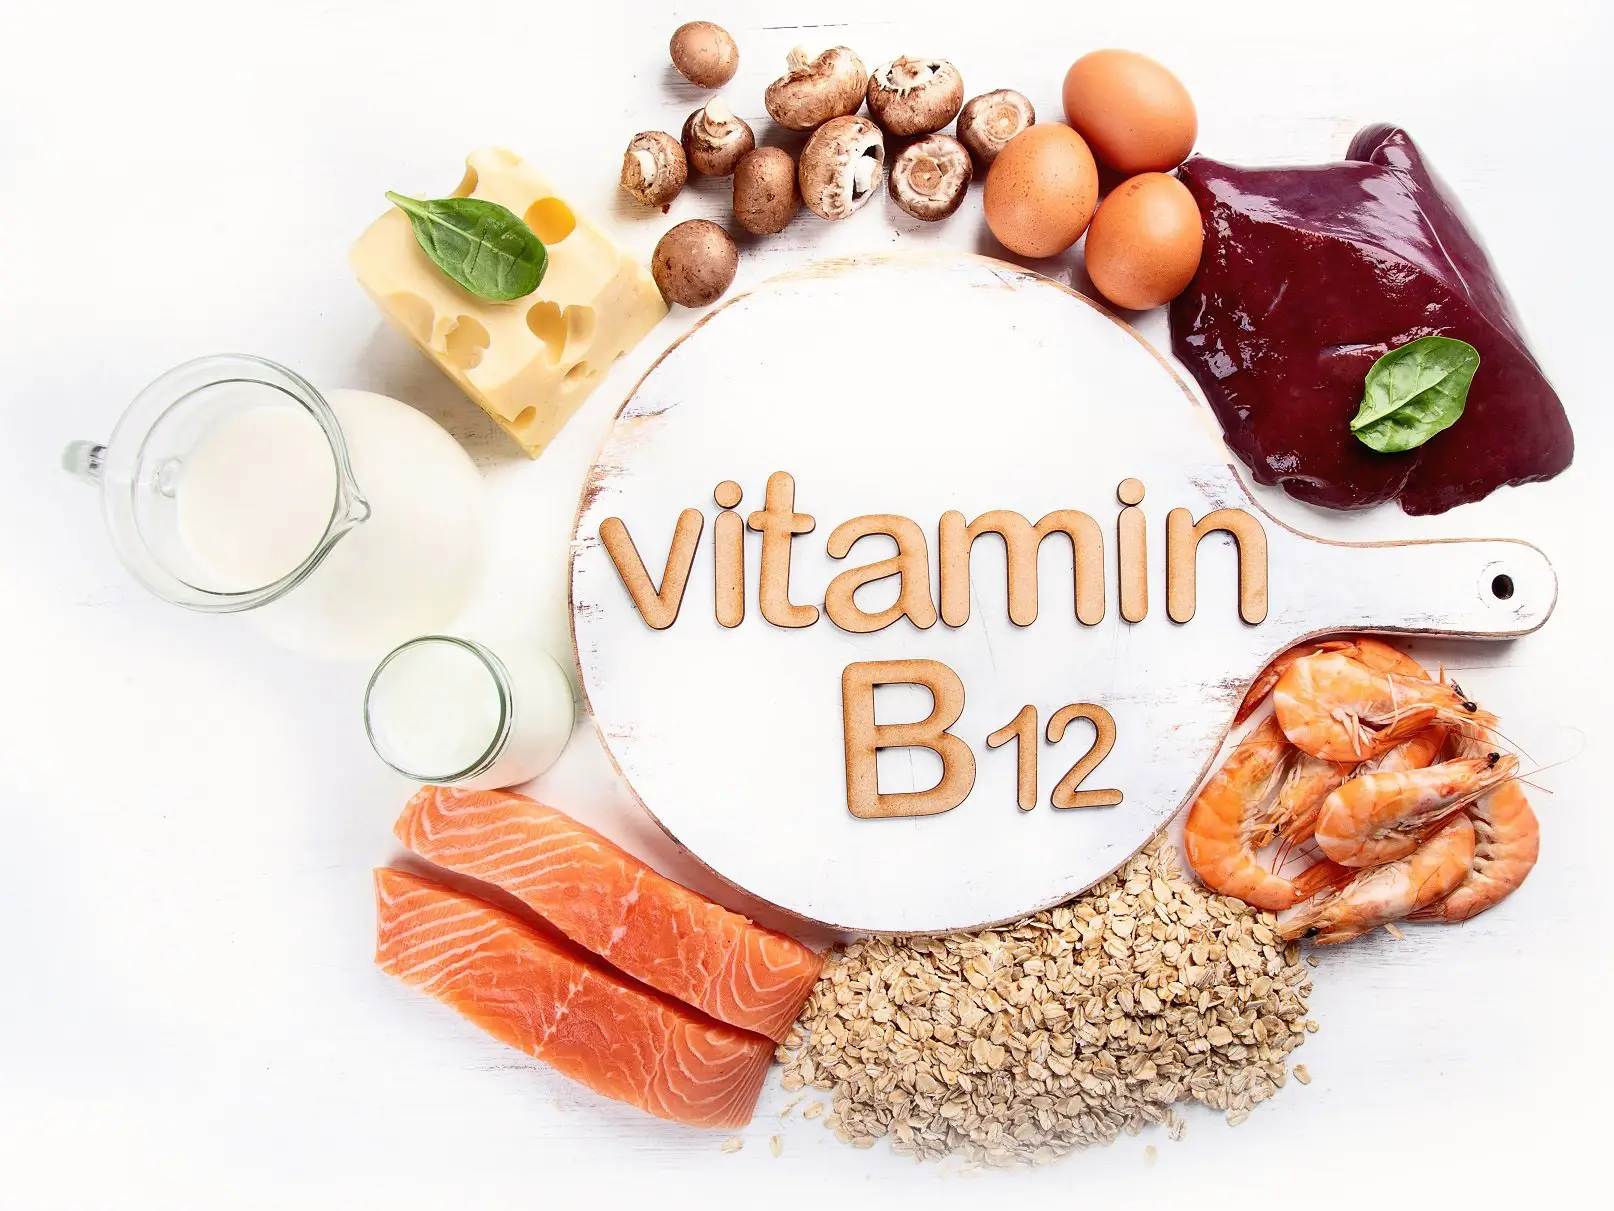 Vitamin B12: Why You Should Care Even if You Eat Meat